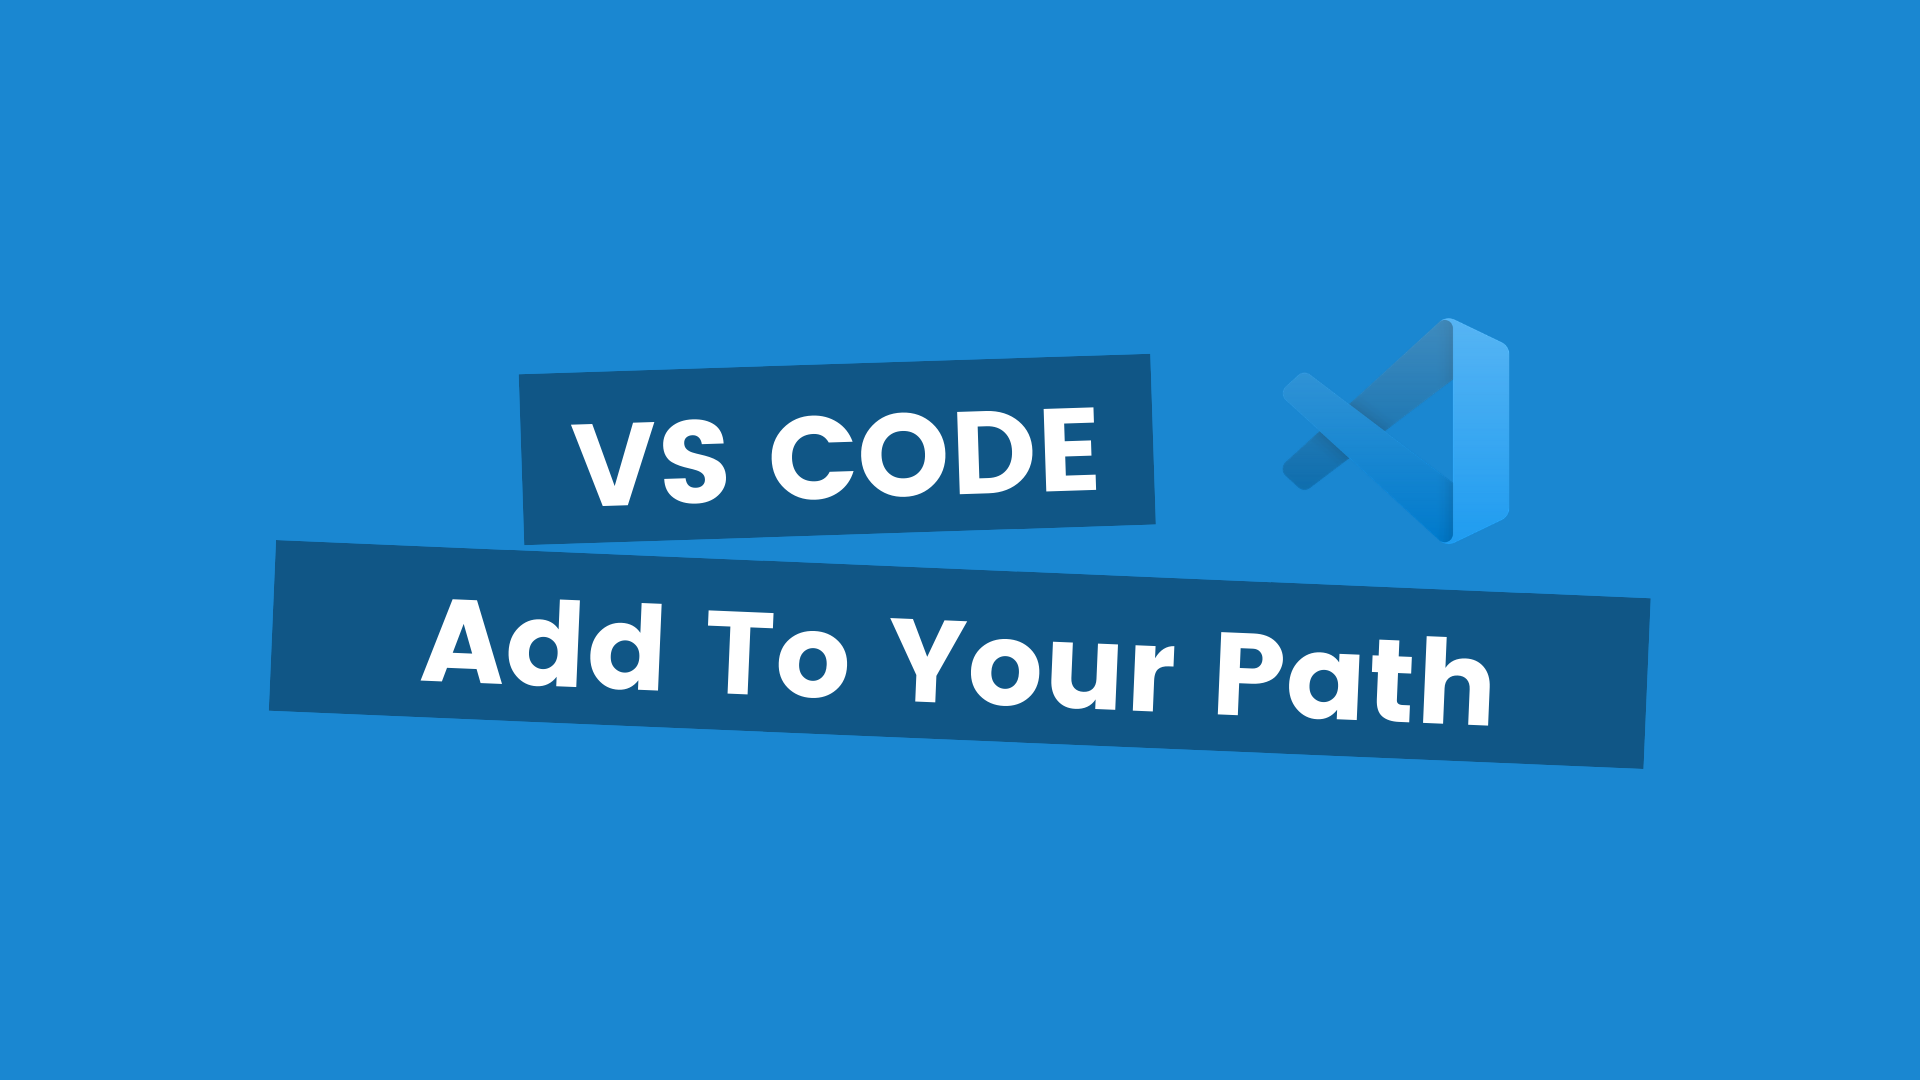 Add VS Code To Your Path